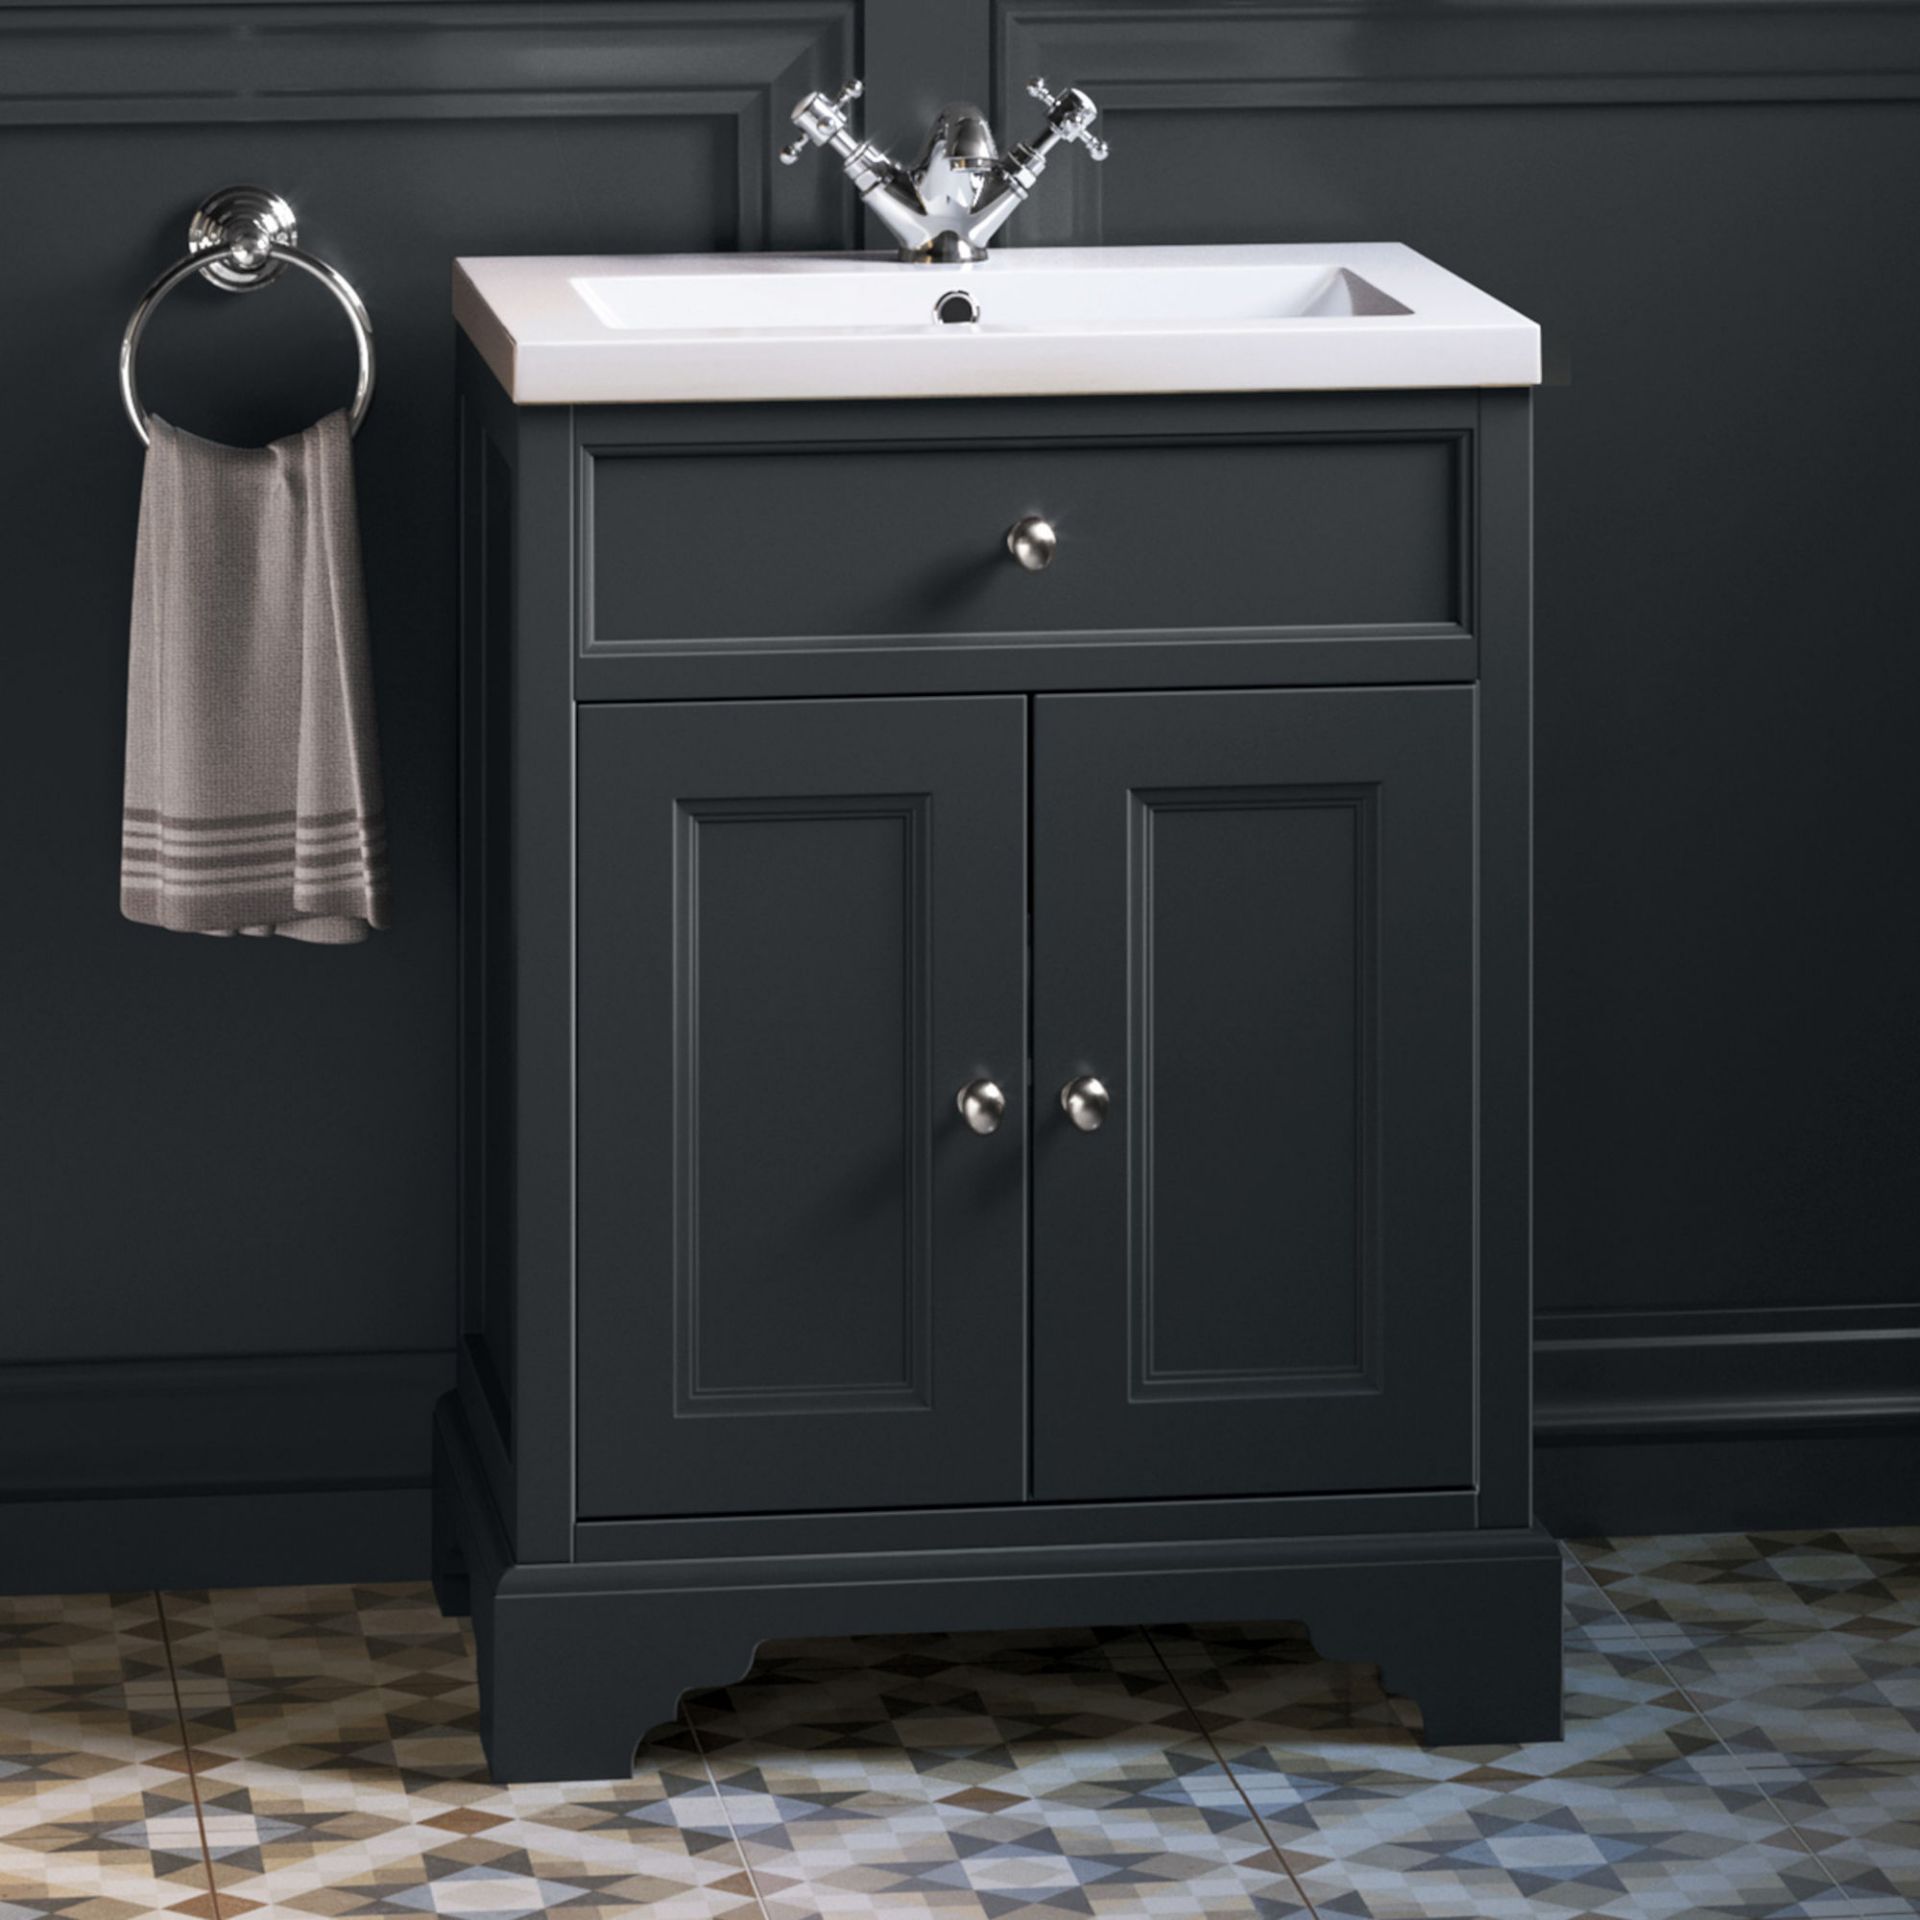 (YC4) 600mm Loxley Charcoal Vanity Unit - Floor Standing. Comes complete with basin. Stunning